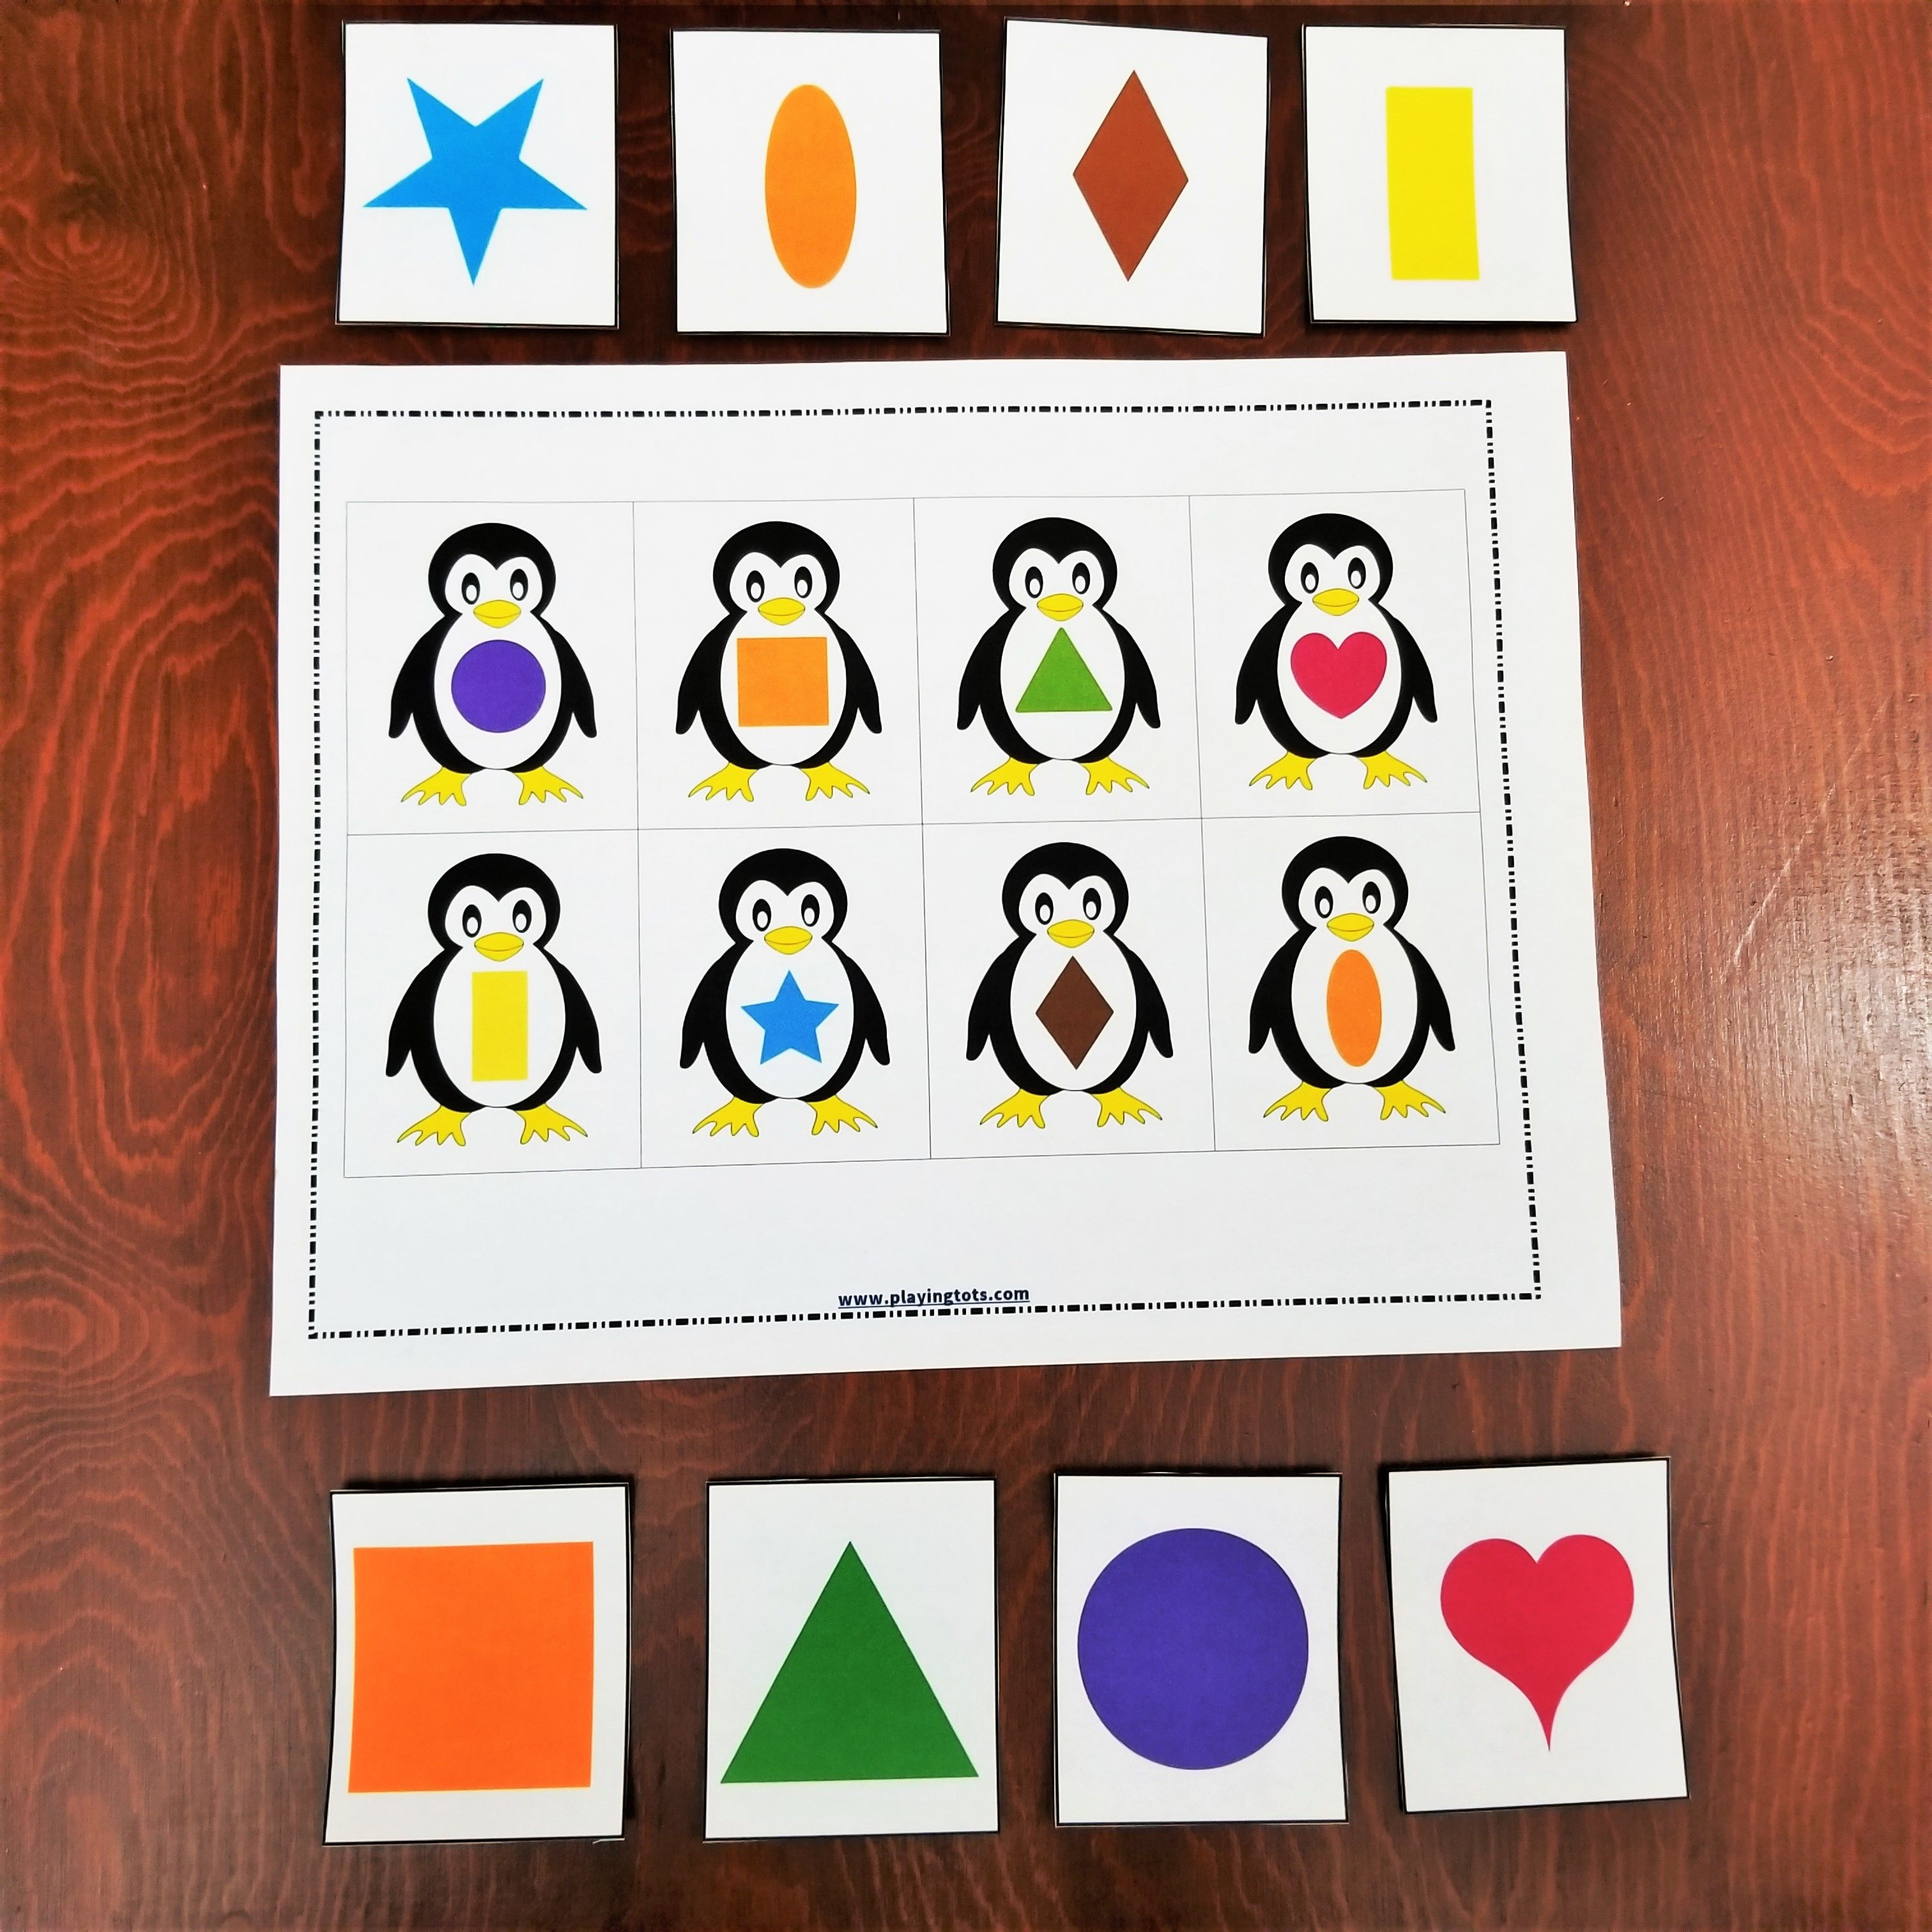 Keywords: Matching,activities,shapes,penguin,animals,toddler,free - File Folder Games For Toddlers Free Printable